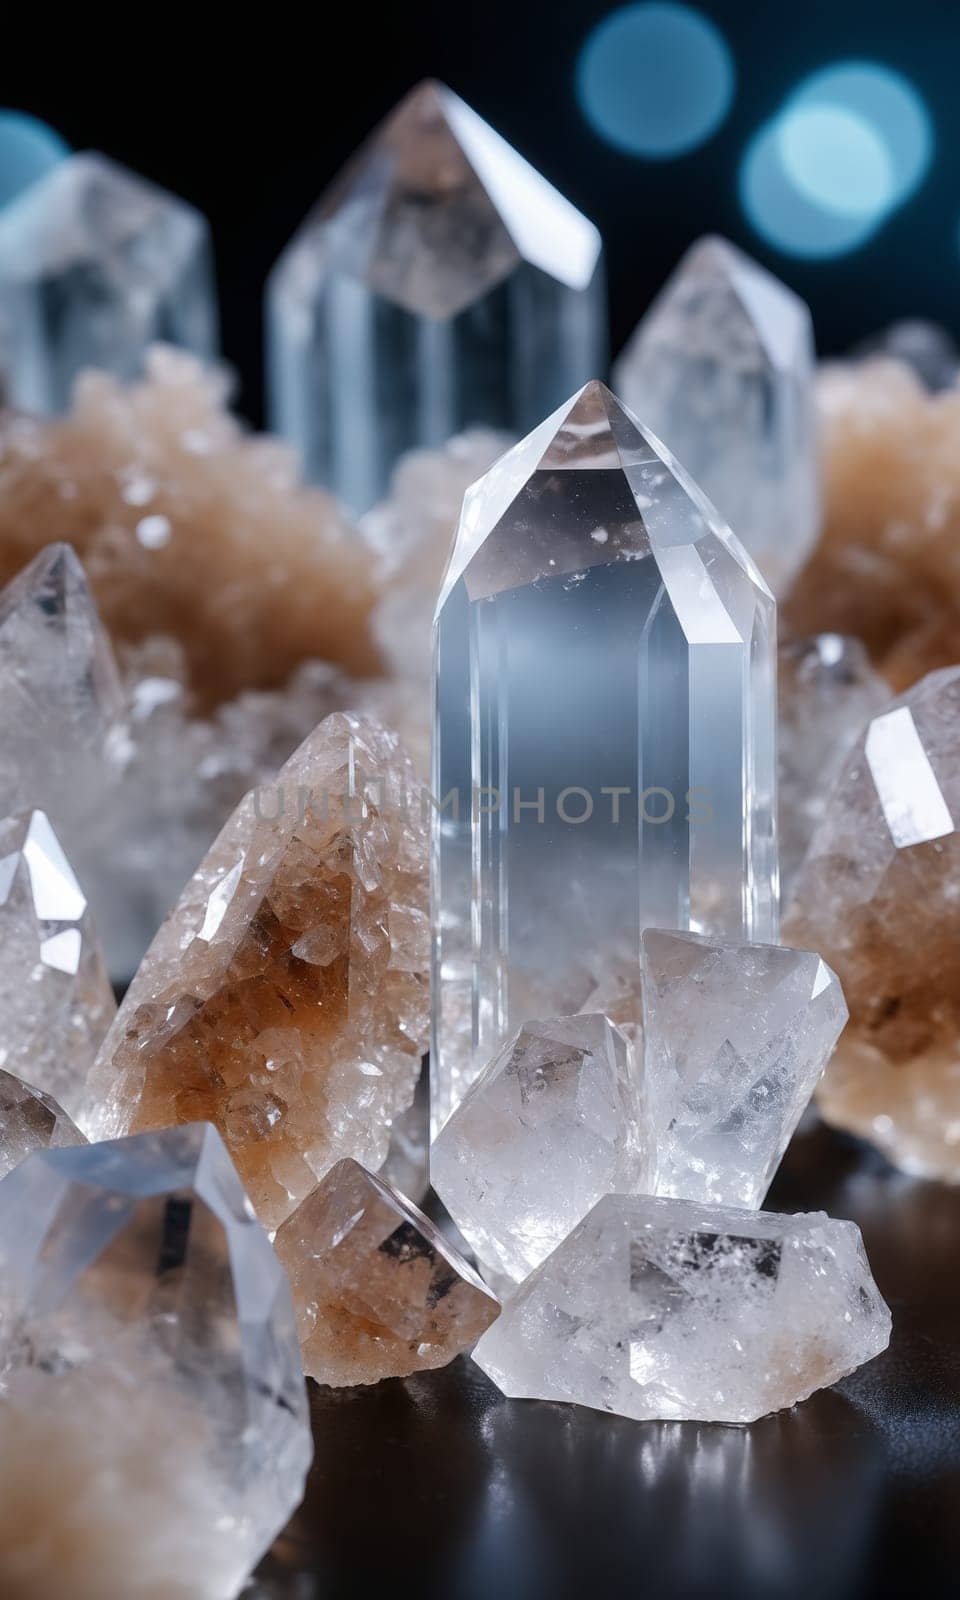 Crystals of crystal quartz on a black background close-up